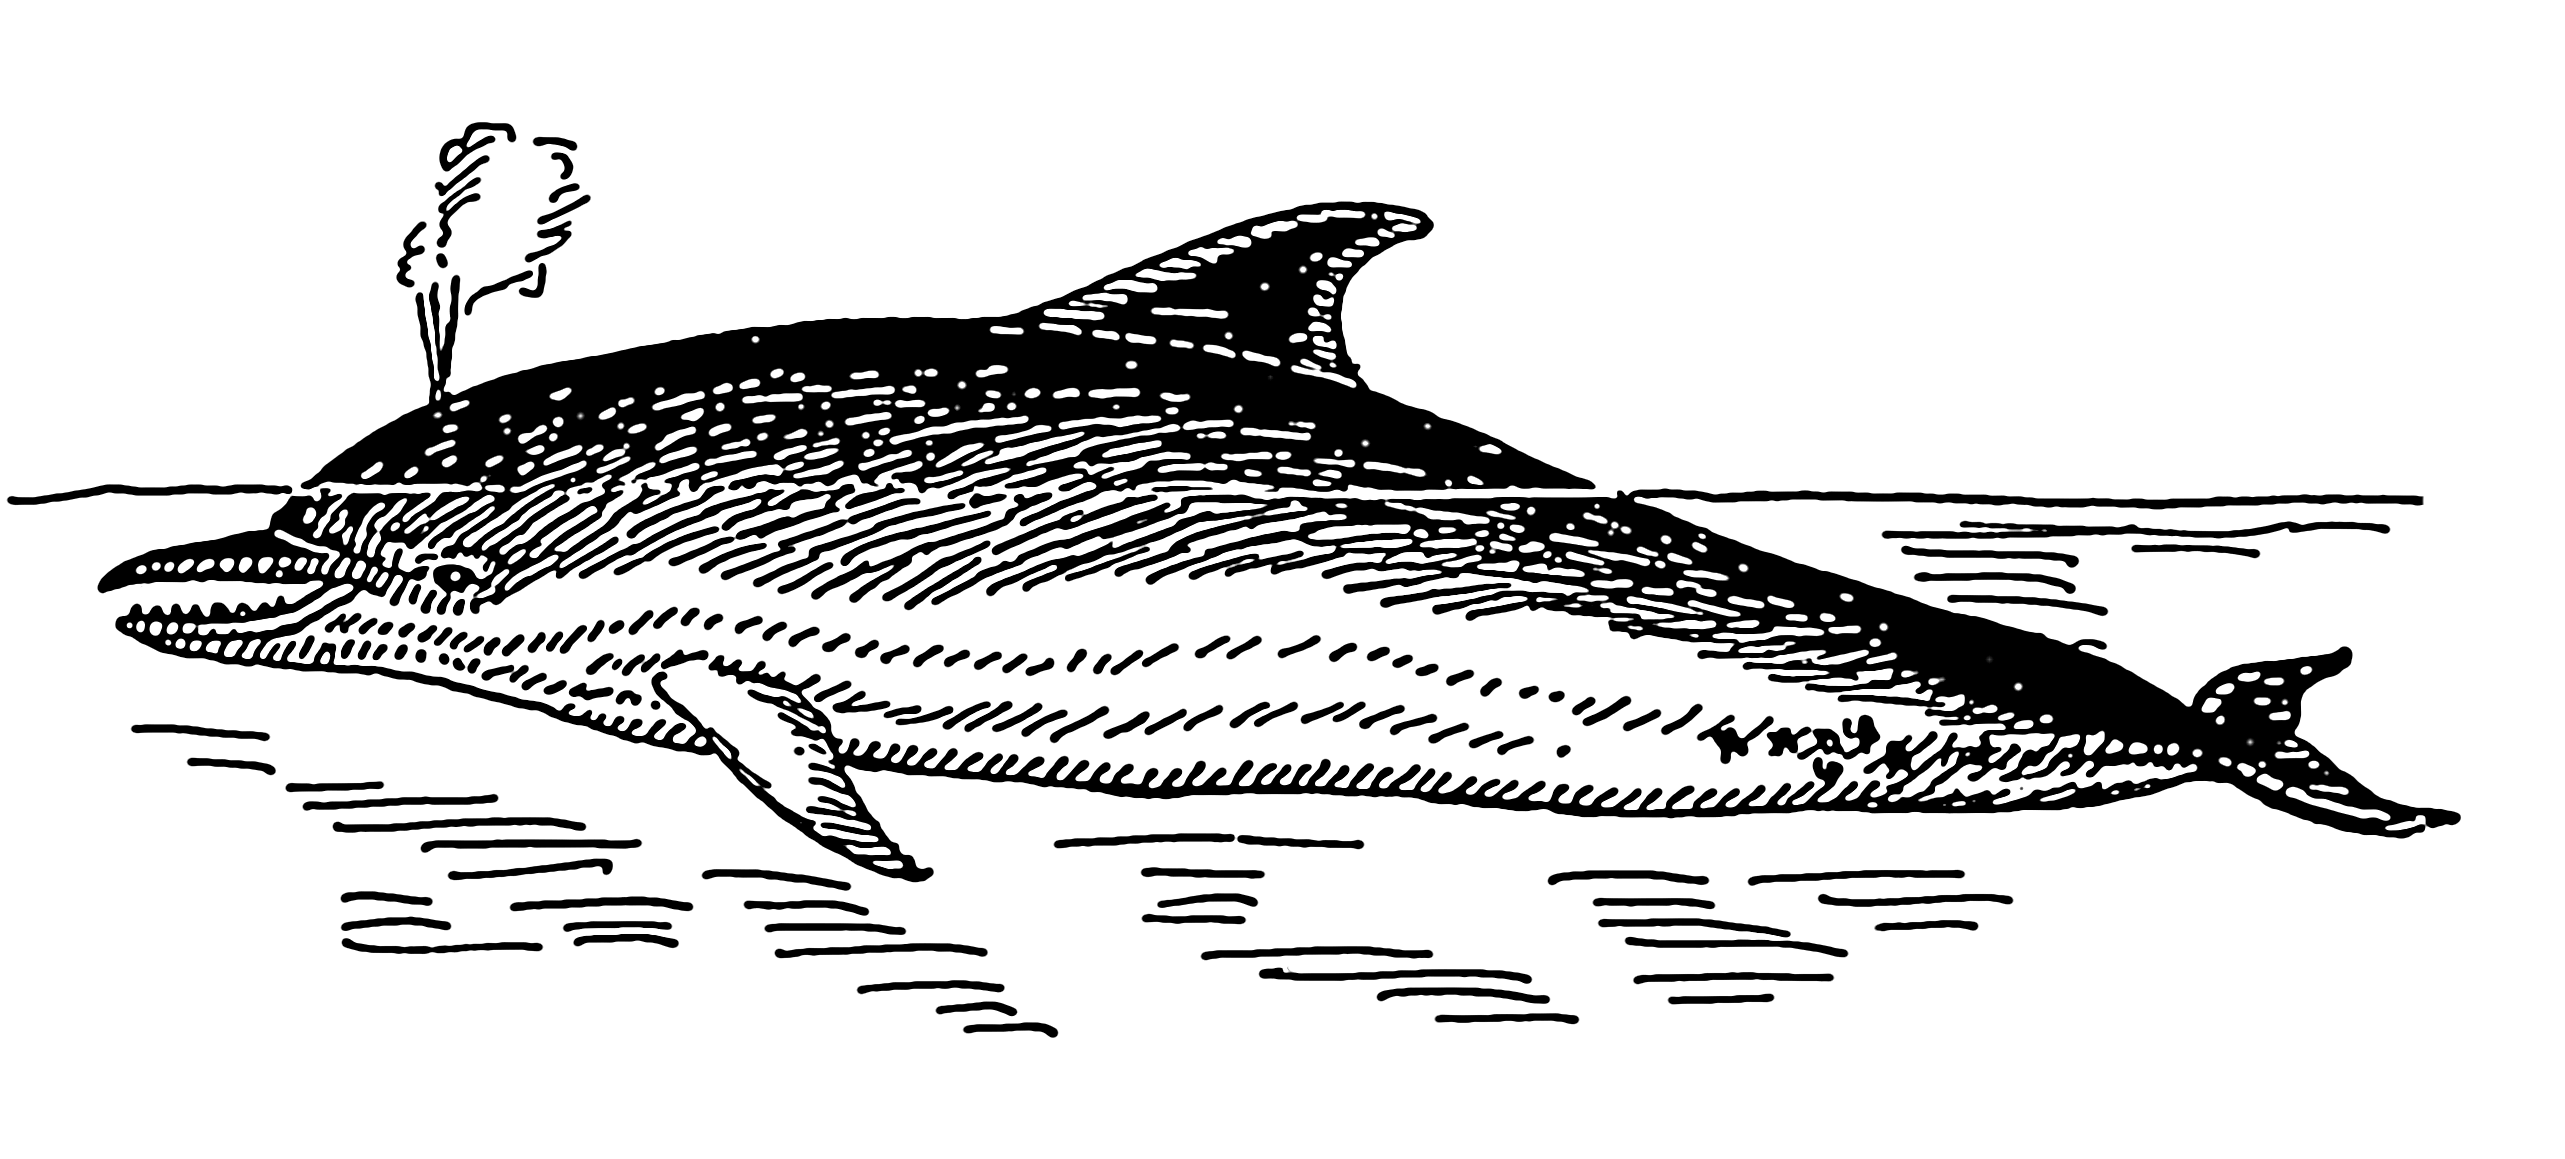 File:Dolphin 2 (PSF).png - Wikimedia Commons